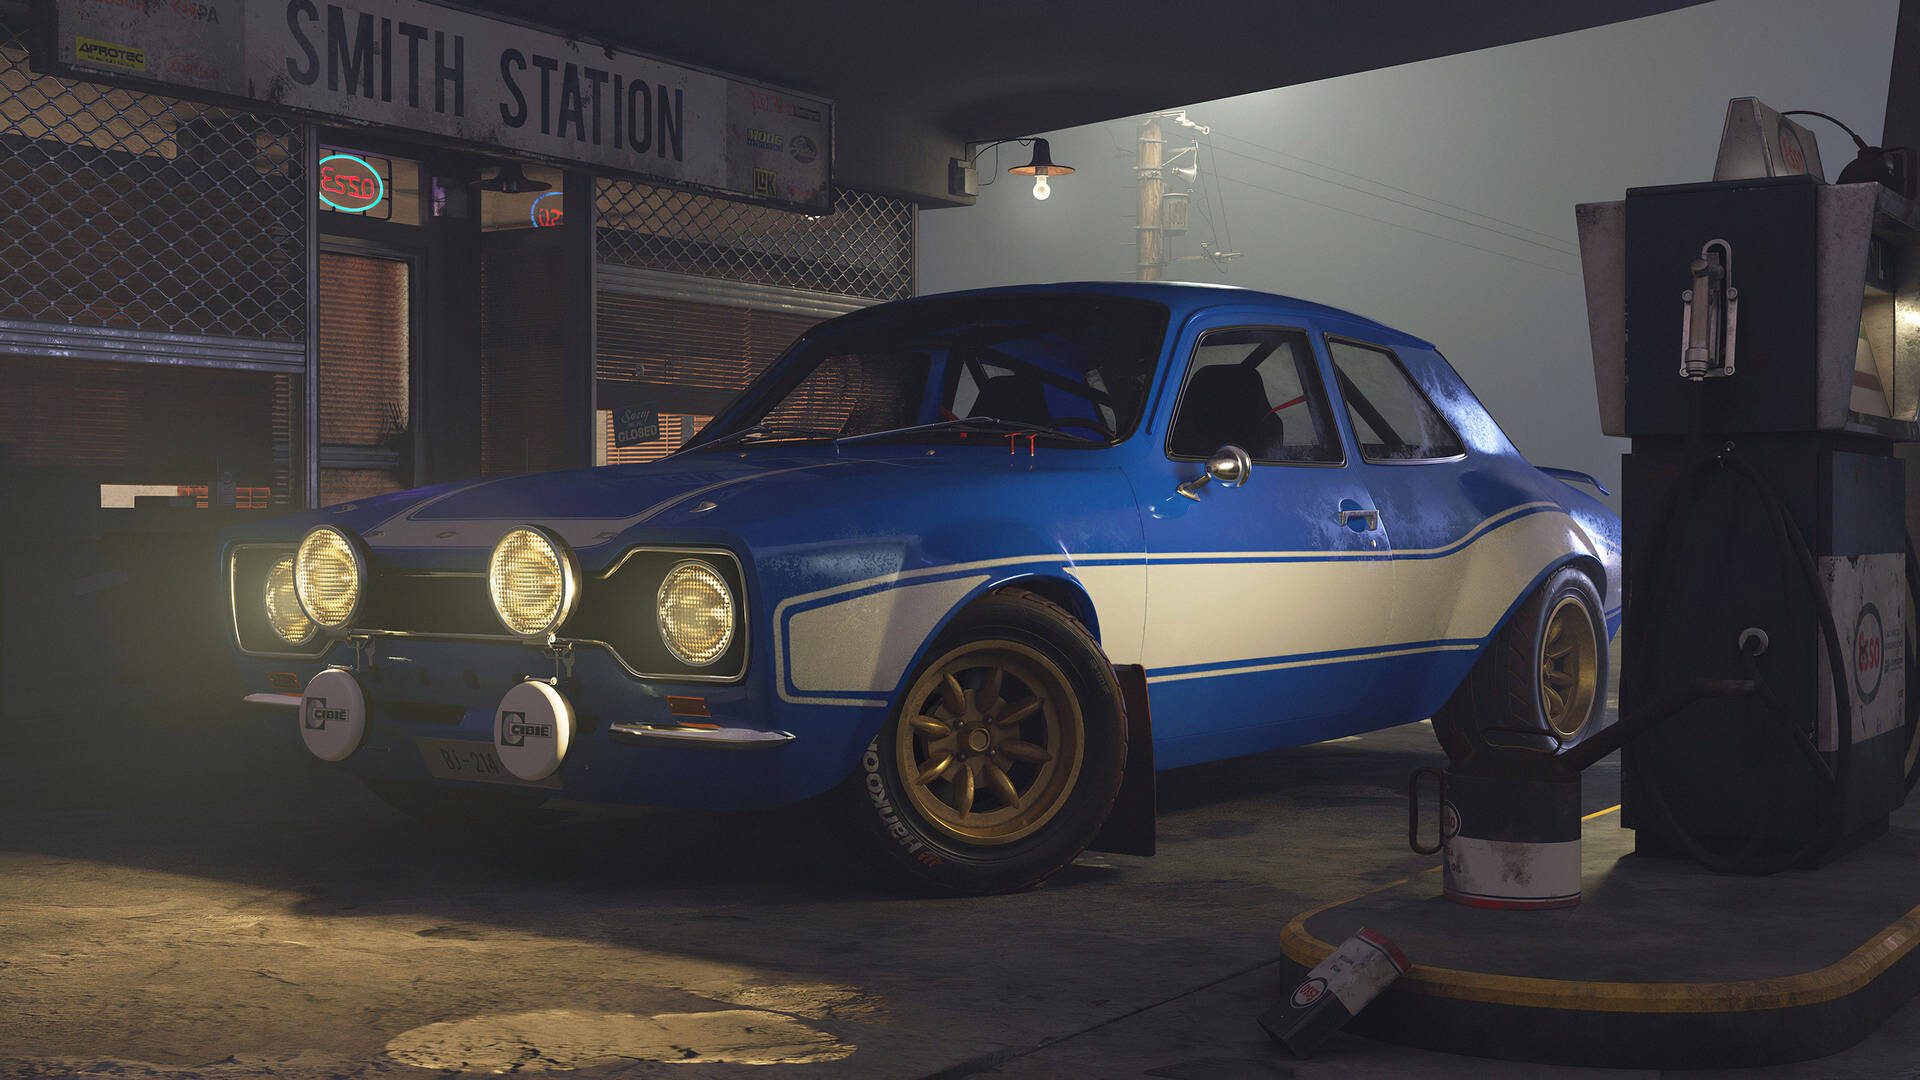 High-speed Experience - A Snapshot Of Fast And Furious Cars In Blue And White Repair Shop